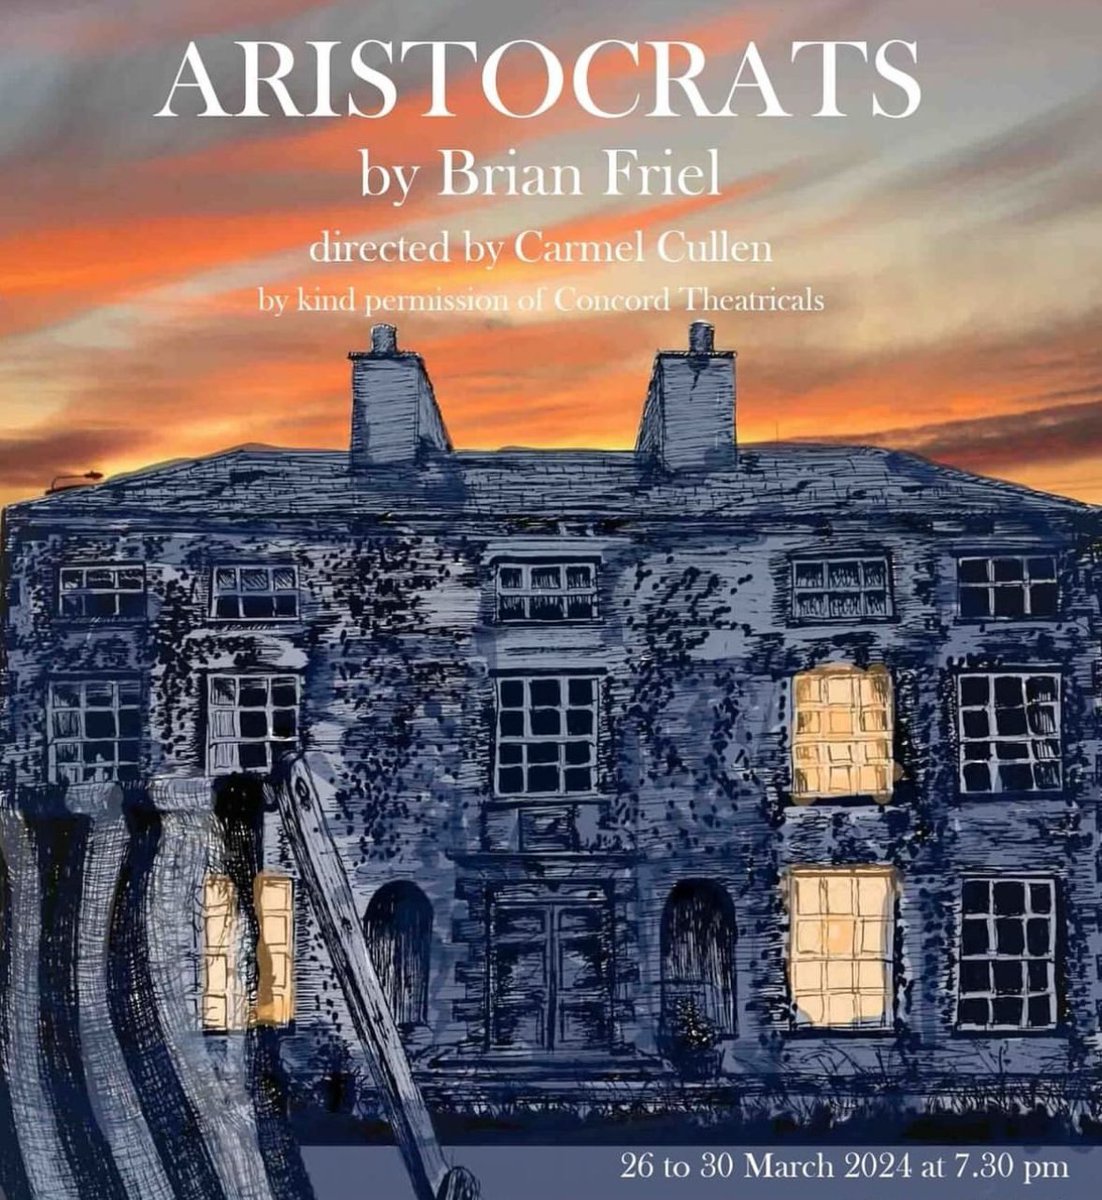 Aristocrats opens ‼️ TONIGHT ‼️ A a touching and harrowing play about the decline of a once prosperous Catholic family, inhabiting the big house ‘Ballybeg Hall’ on a hill overlooking Ballybeg, a fictional village in Donegal. 📆 26-30 Mar 🎟️Available: milltheatre.ie/events/aristoc…